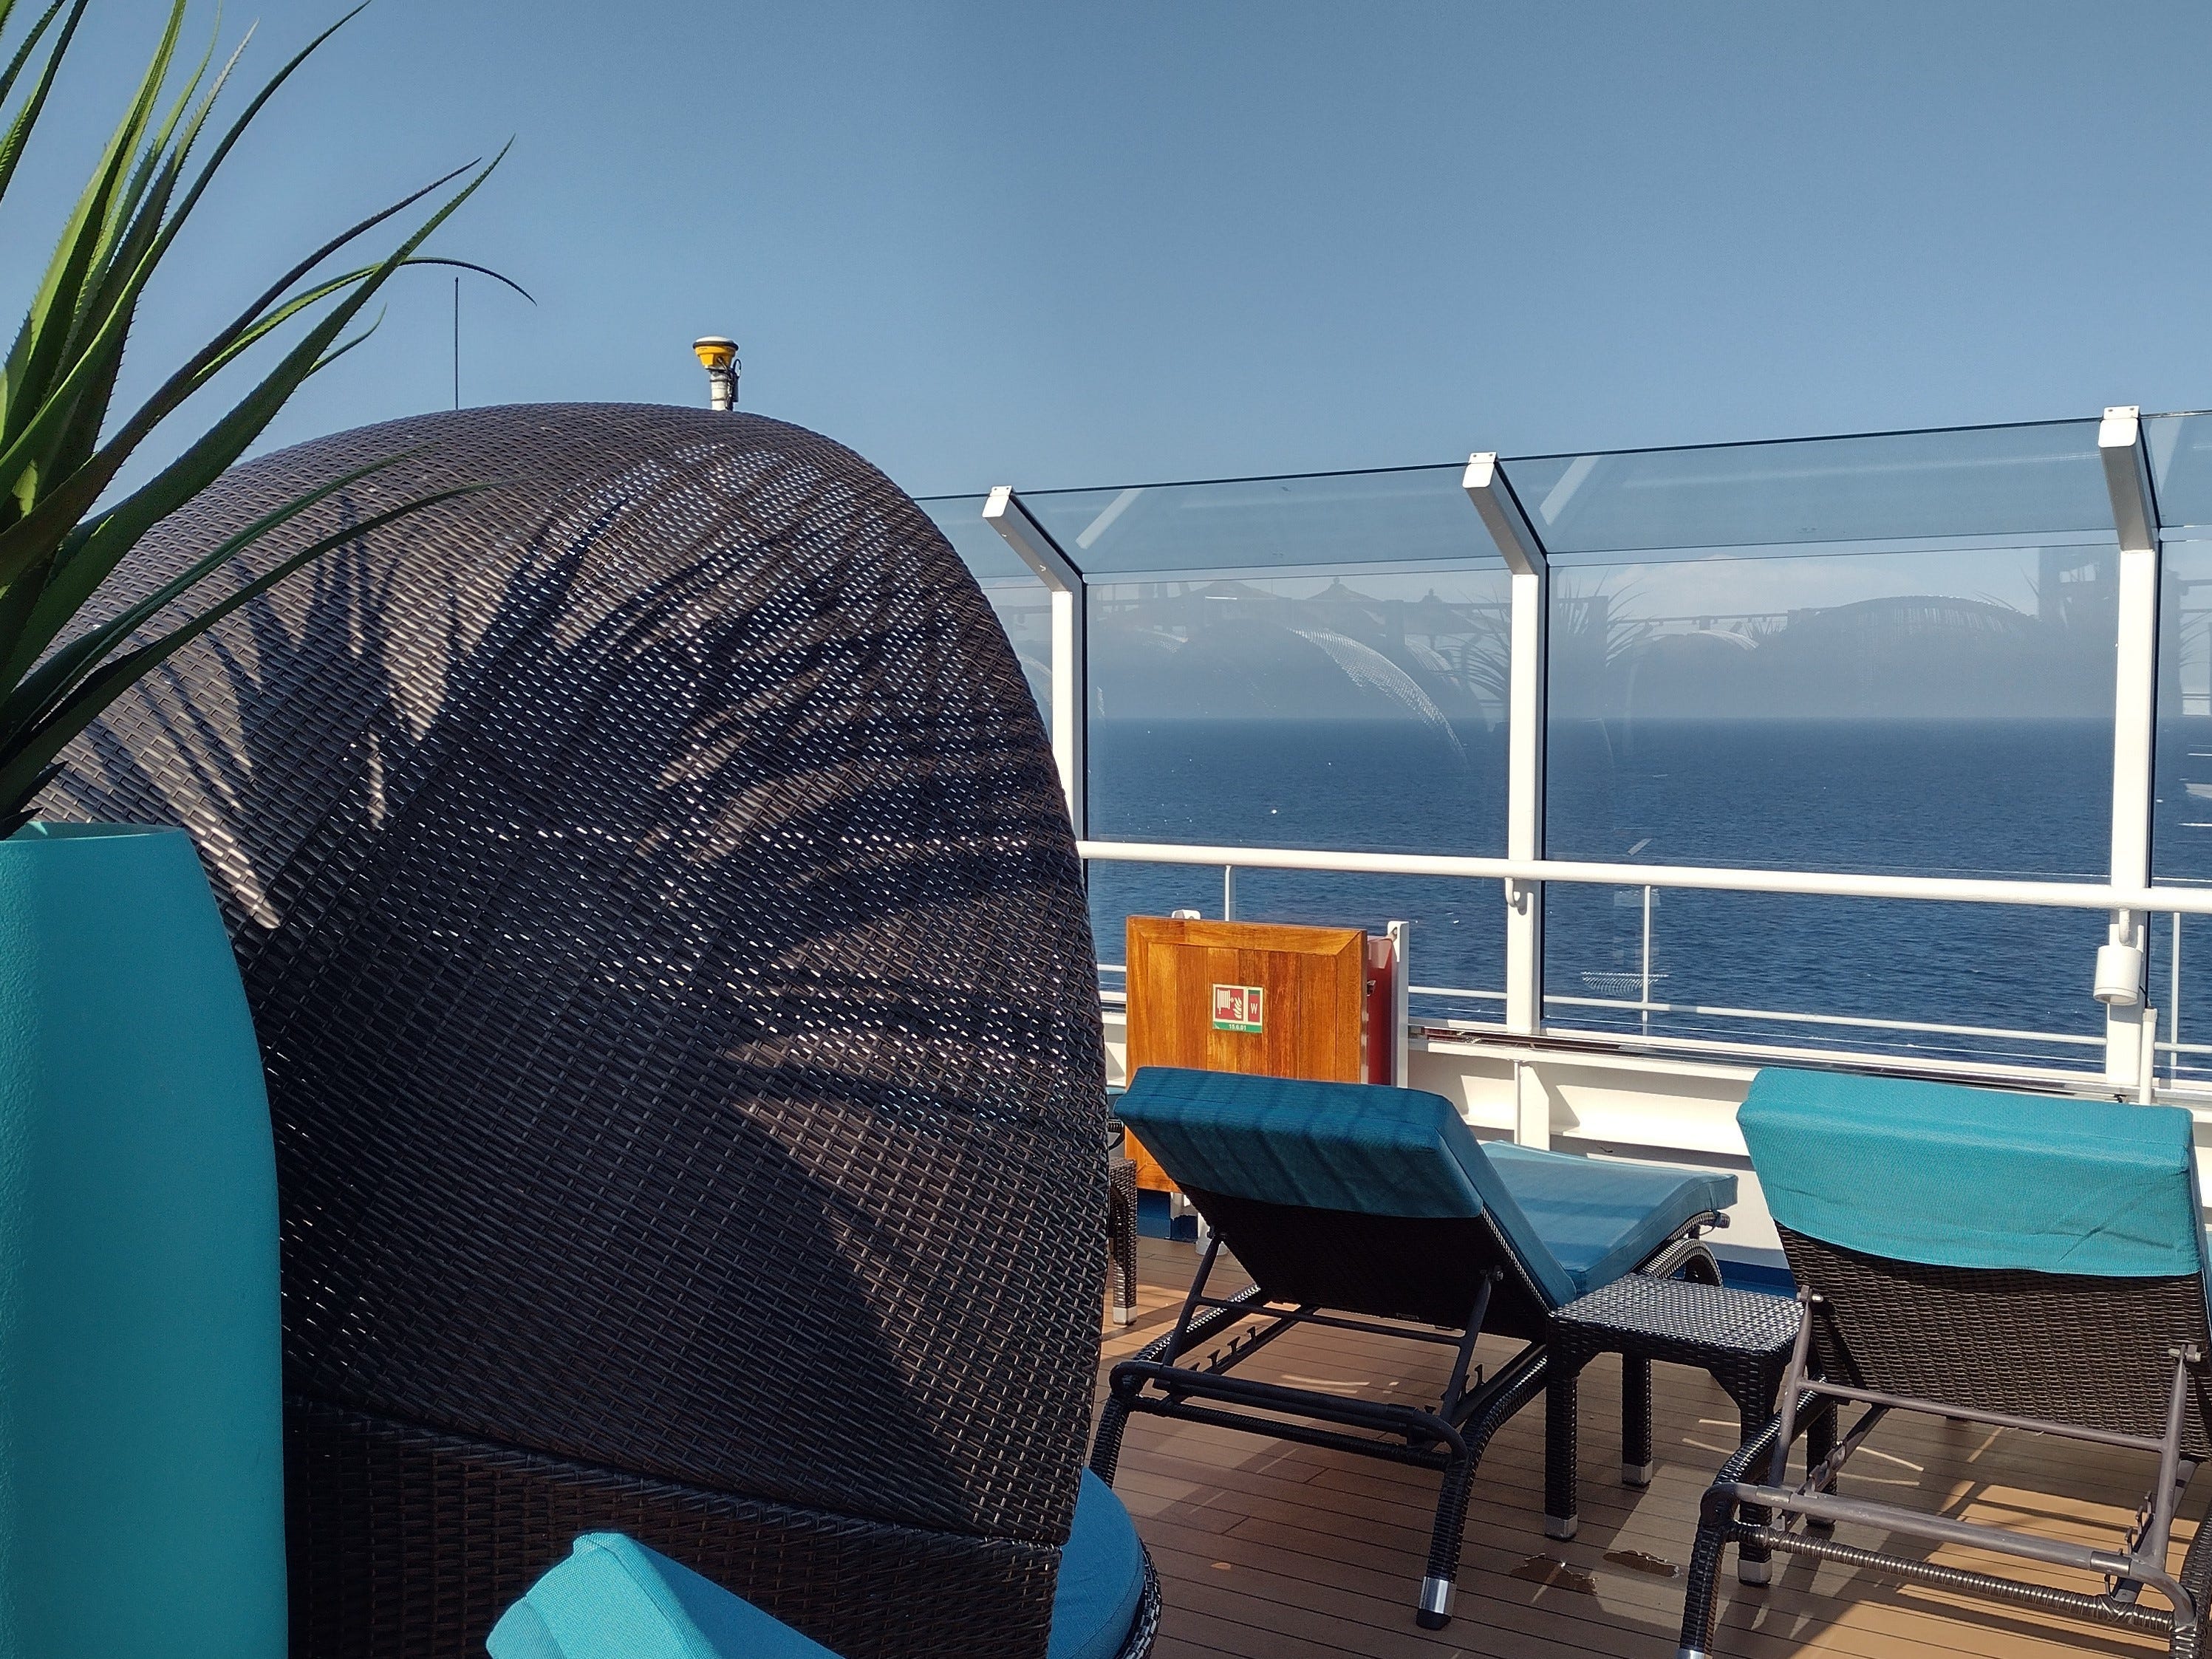 <p>I admit I'm a little reluctant to share this tip because every time I've visited <a href="https://www.carnival.com/onboard/serenity" rel="noopener nofollow sponsored">Carnival's Serenity Retreat</a> on multiple ships, I'm surprised how sparsely populated the relaxing space is.</p><p>I don't really want to spoil the oasis-like feeling, but it's one of my favorite places to go on a Carnival ship, and I think you're missing out if you don't take advantage of it.</p><p>Serenity is an adults-only area that is nicely tucked away on an upper deck, away from foot traffic, so only those who want to find it will. I think it's a wonderful escape from daytime pool deck parties and kids of all ages running around with melting ice cream cones. </p><p>In my experience, many cruise lines charge extra to access to a similar adult-only space. According to Cruise Critic, the full day rate for enjoying <a href="https://affiliate.insider.com?h=ce543aec5c83ab7799f63f22683d59f54d8a84b79bec1b9bde1b8d8ebc64e6df&platform=msn_reviews&postID=6419d37fd013965bc96cf328&site=in&u=https%3A%2F%2Fwww.cruisecritic.com%2Farticles.cfm%3FID%3D2284&utm_source=msn_reviews" rel="noopener nofollow sponsored">The Sanctuary on Princess Cruises</a> is usually $40 per person, or $20 for a half day. Cruise Critic also says <a href="https://affiliate.insider.com?h=b09c752080b851a8909af1c47682a61ff0b35ff2586a3b1d2df48abe75a3987d&platform=msn_reviews&postID=6419d37fd013965bc96cf328&site=in&u=https%3A%2F%2Fwww.cruisecritic.com%2Farticles.cfm%3FID%3D2705&utm_source=msn_reviews" rel="noopener nofollow sponsored">Norwegian's adult-only Vibe Beach Club</a>, which has a private bar, lounge space, and its own hot tub area on a quiet part of the ship, can cost $99 per person for a day pass, or around $209 for a weeklong pass.</p><p>So, in my mind, there's no better value than having an adult-only space on Carnival for zero dollars. </p><p>The Serenity Retreat is <a href="https://www.carnival.com/onboard/serenity" rel="noopener nofollow sponsored">available throughout the Carnival fleet</a>. It's often two levels at the front of the ship and remains out of sight for the most part thanks to a privacy fence.</p><p>I think many guests may assume it has a cover charge or is perhaps only available to suite guests. That is not the case, and anyone over the age of 21 can come at their leisure to relax on loungers, sun beds, day beds, and hammocks. I always find plenty of fresh towels and love to take a dip in one of the oversized spa tubs.</p><p>A light lunch of fresh fruit, salads, and wraps is usually available, alongside a quiet bar area, where soft music plays ever so lightly in the background.  </p>